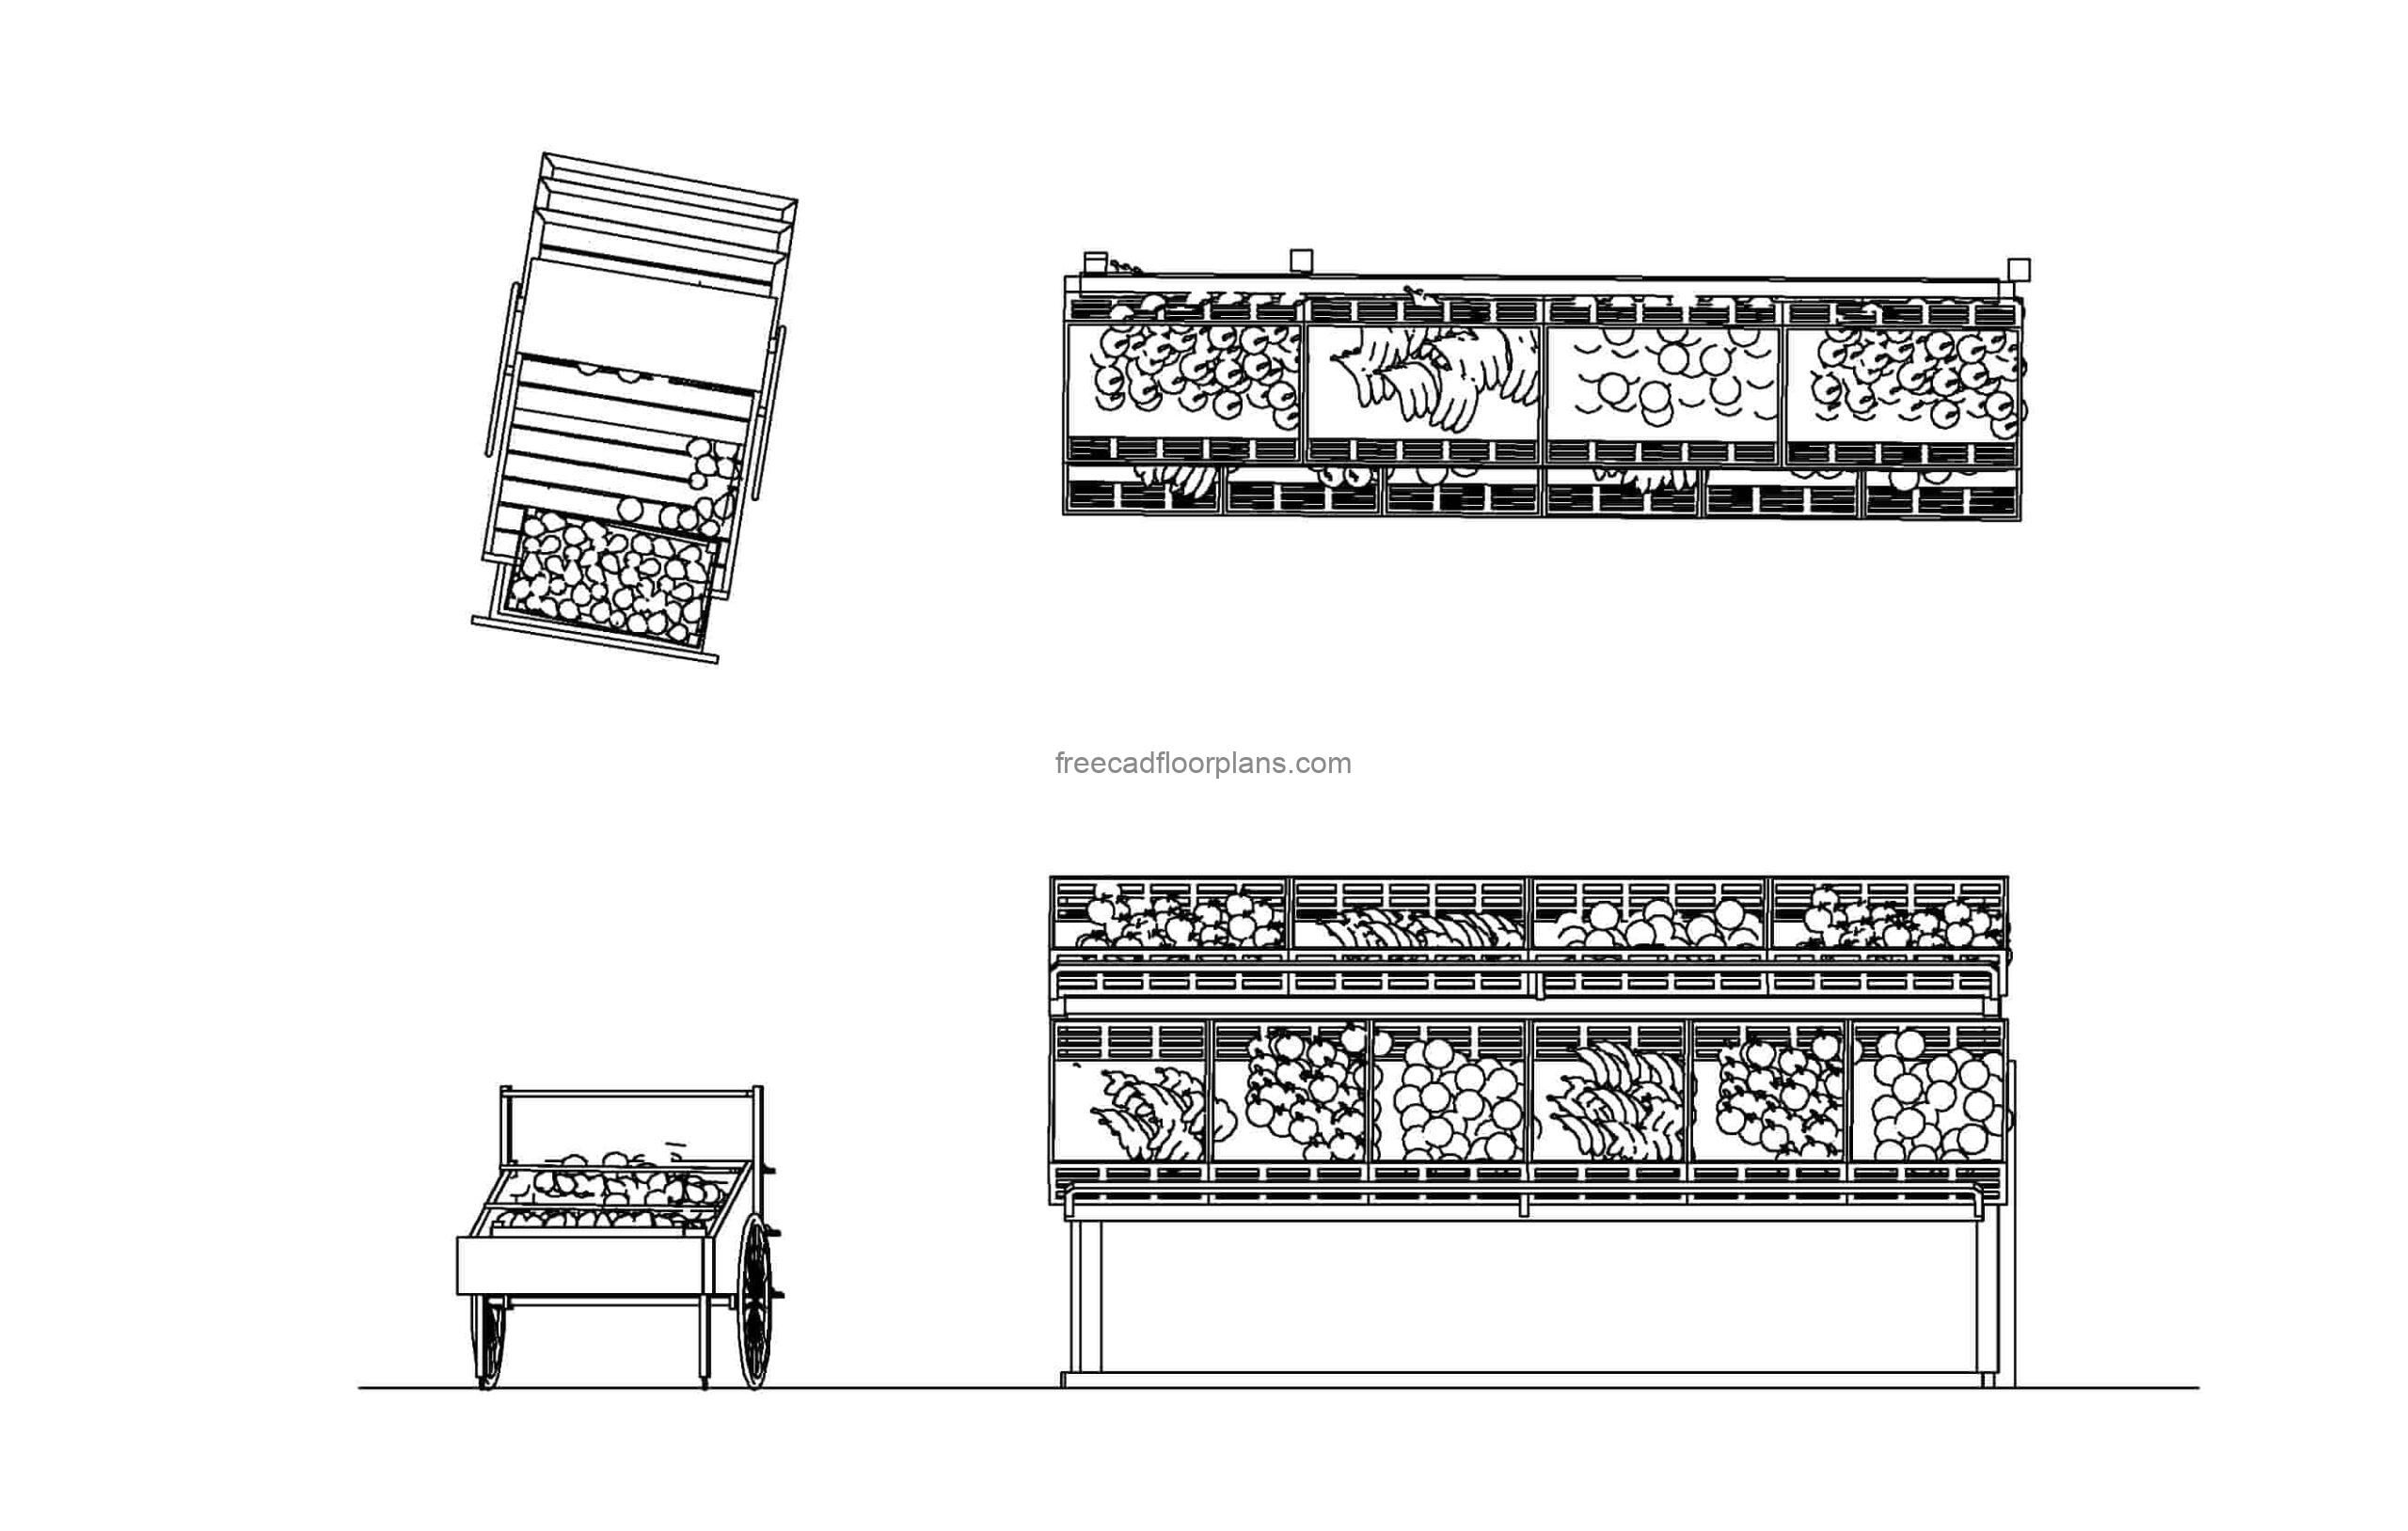 autocad drawing of different groceries, plan and elevation views, dwg file free for download